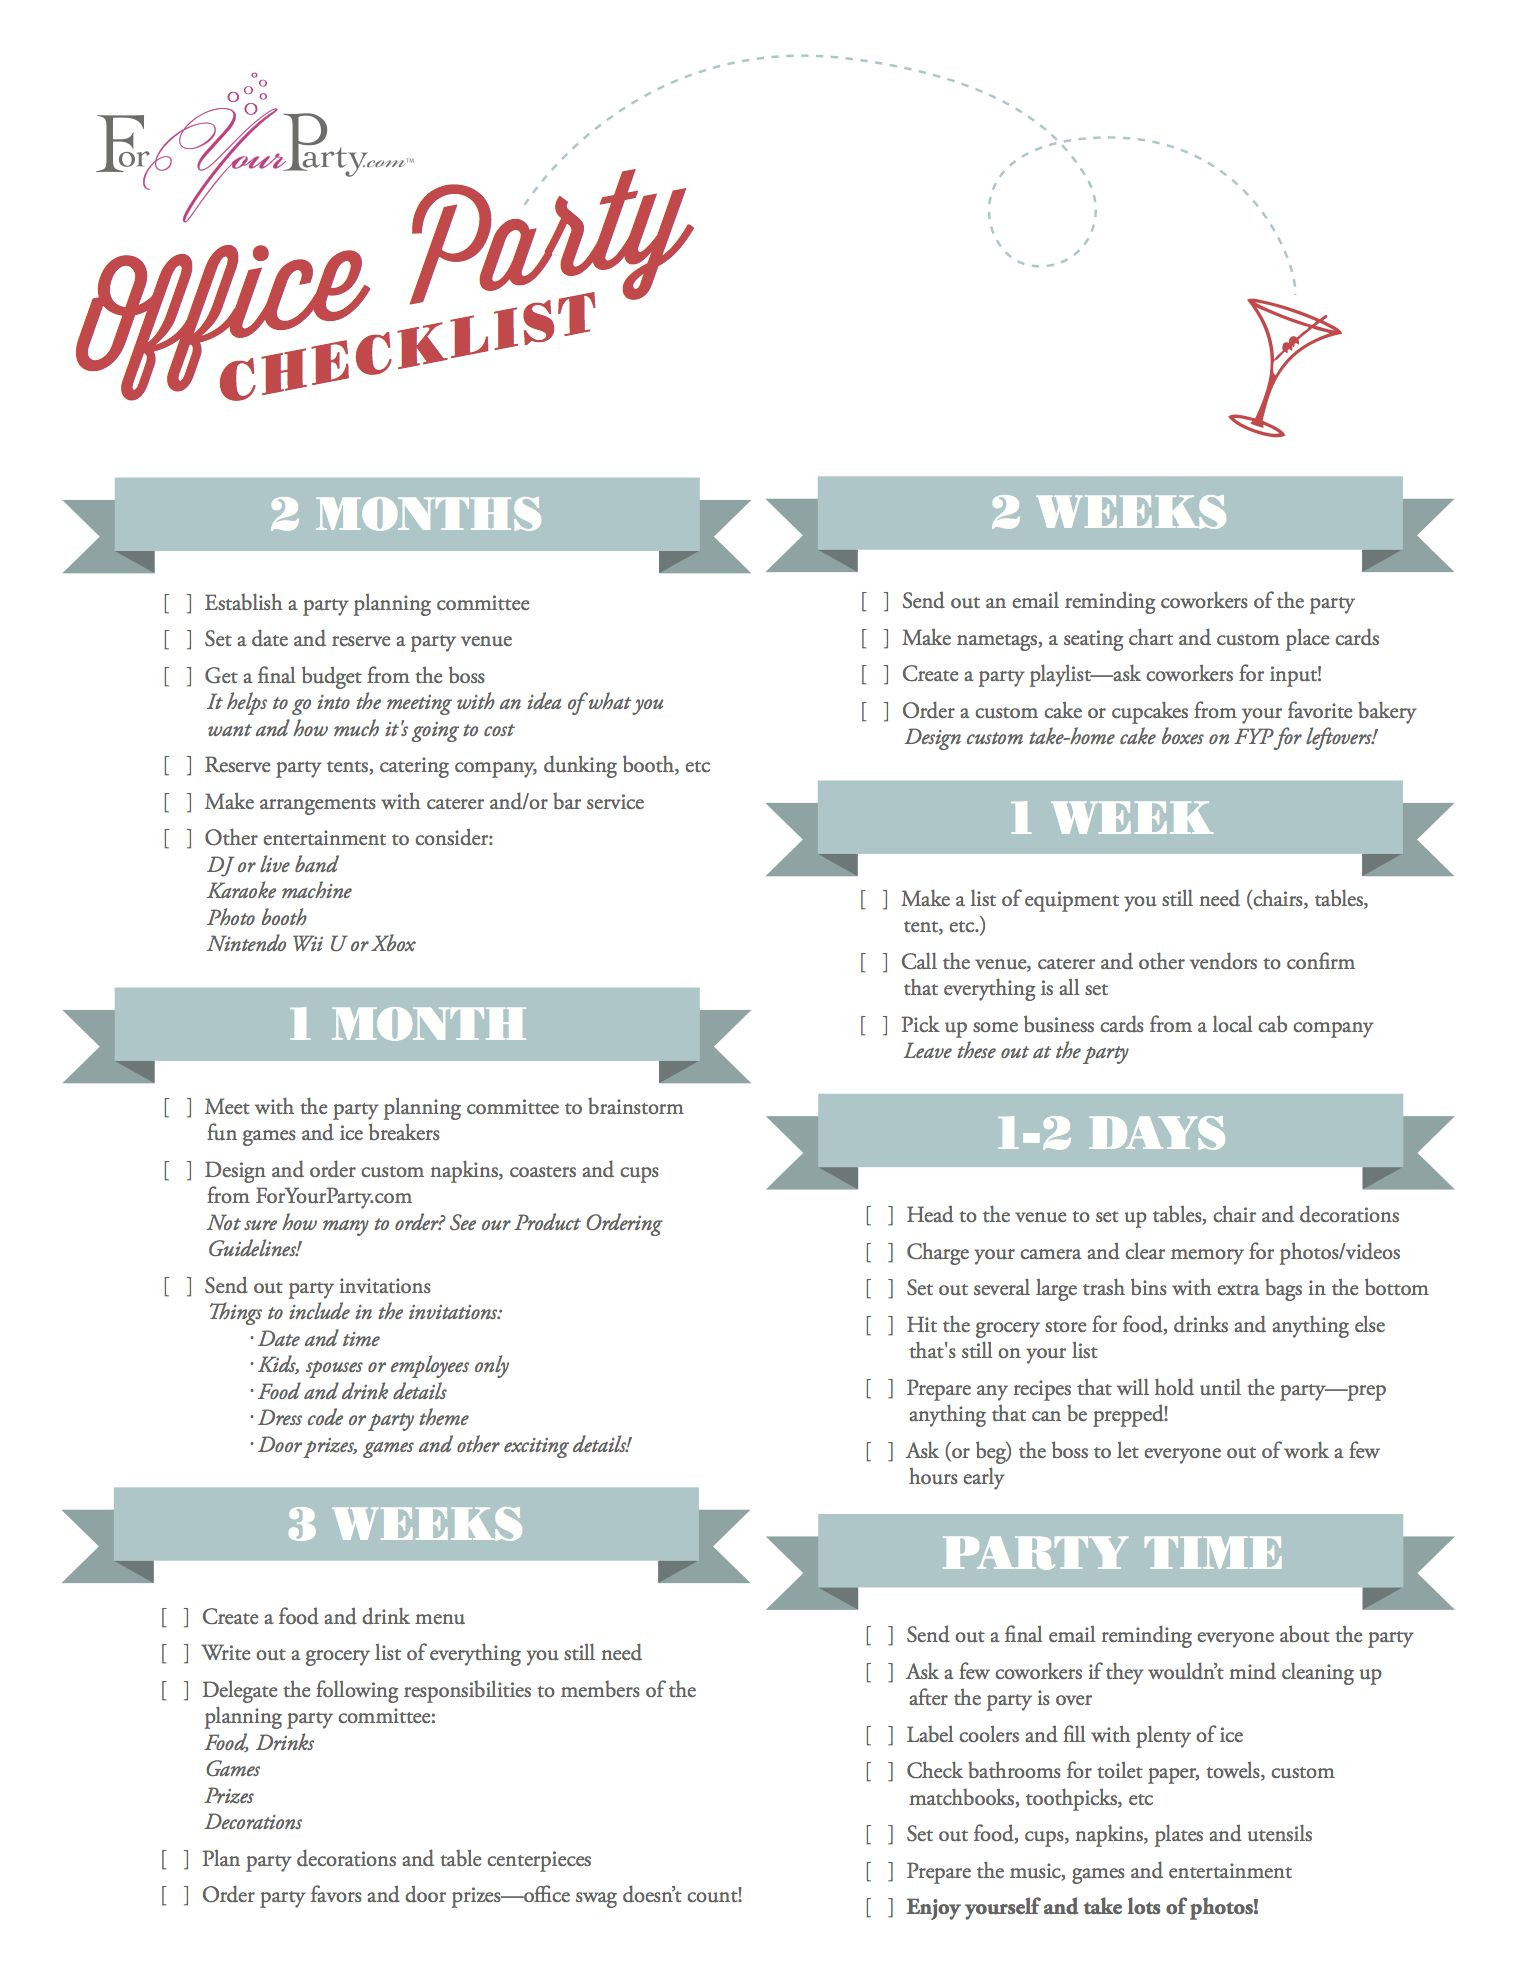 Company Holiday Party Ideas On A Budget
 Plan your office holiday party right with our checklist